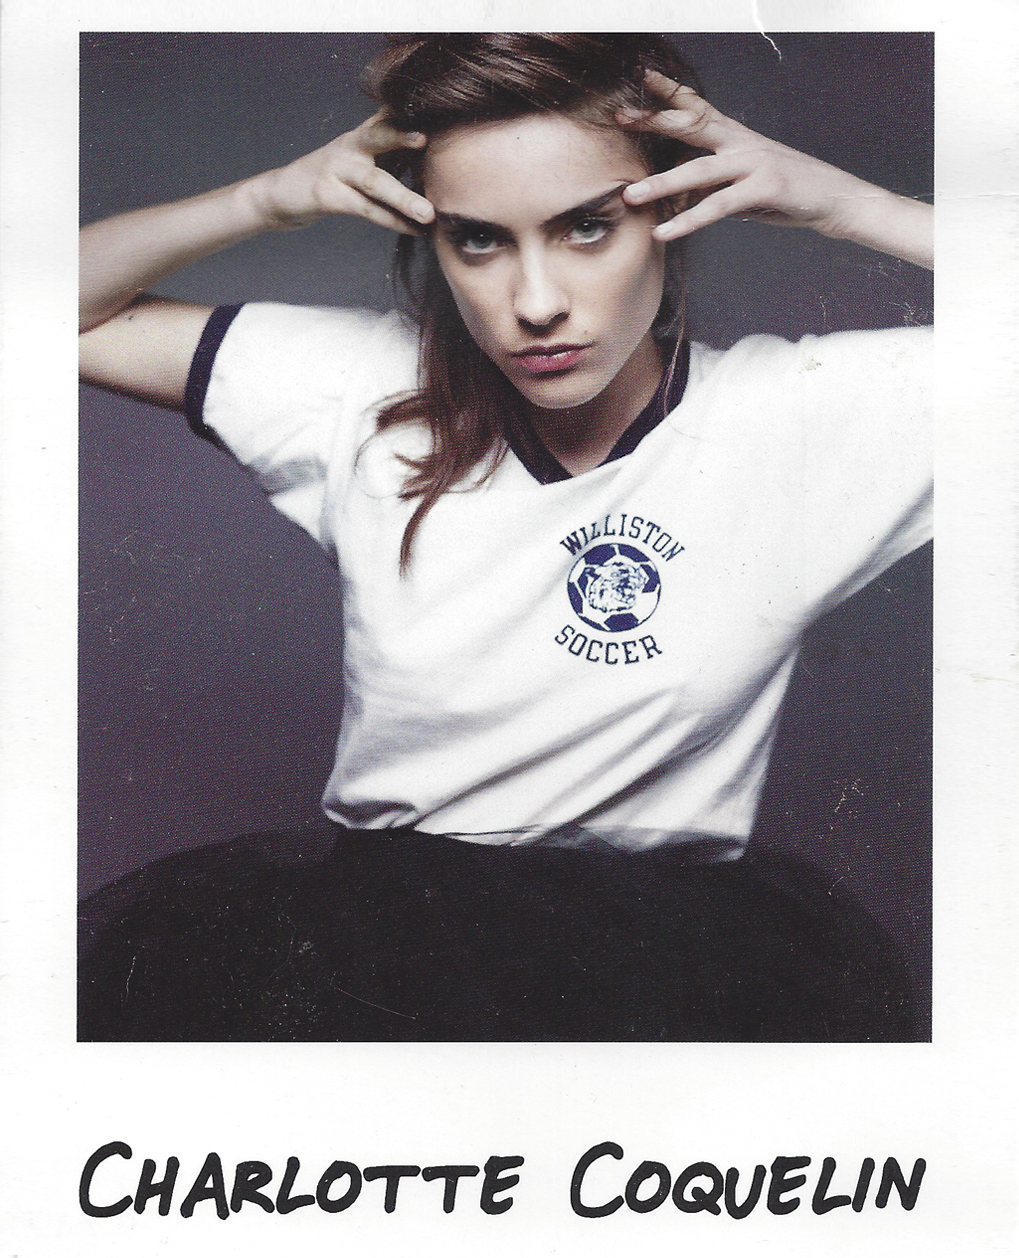 NYC_Fashion_Photographer_Polaroid_Behind_The_Scenes_Photoshoot_Impossible_Film_Camera_IMG_Models_Charlotte_Coquelin_Card